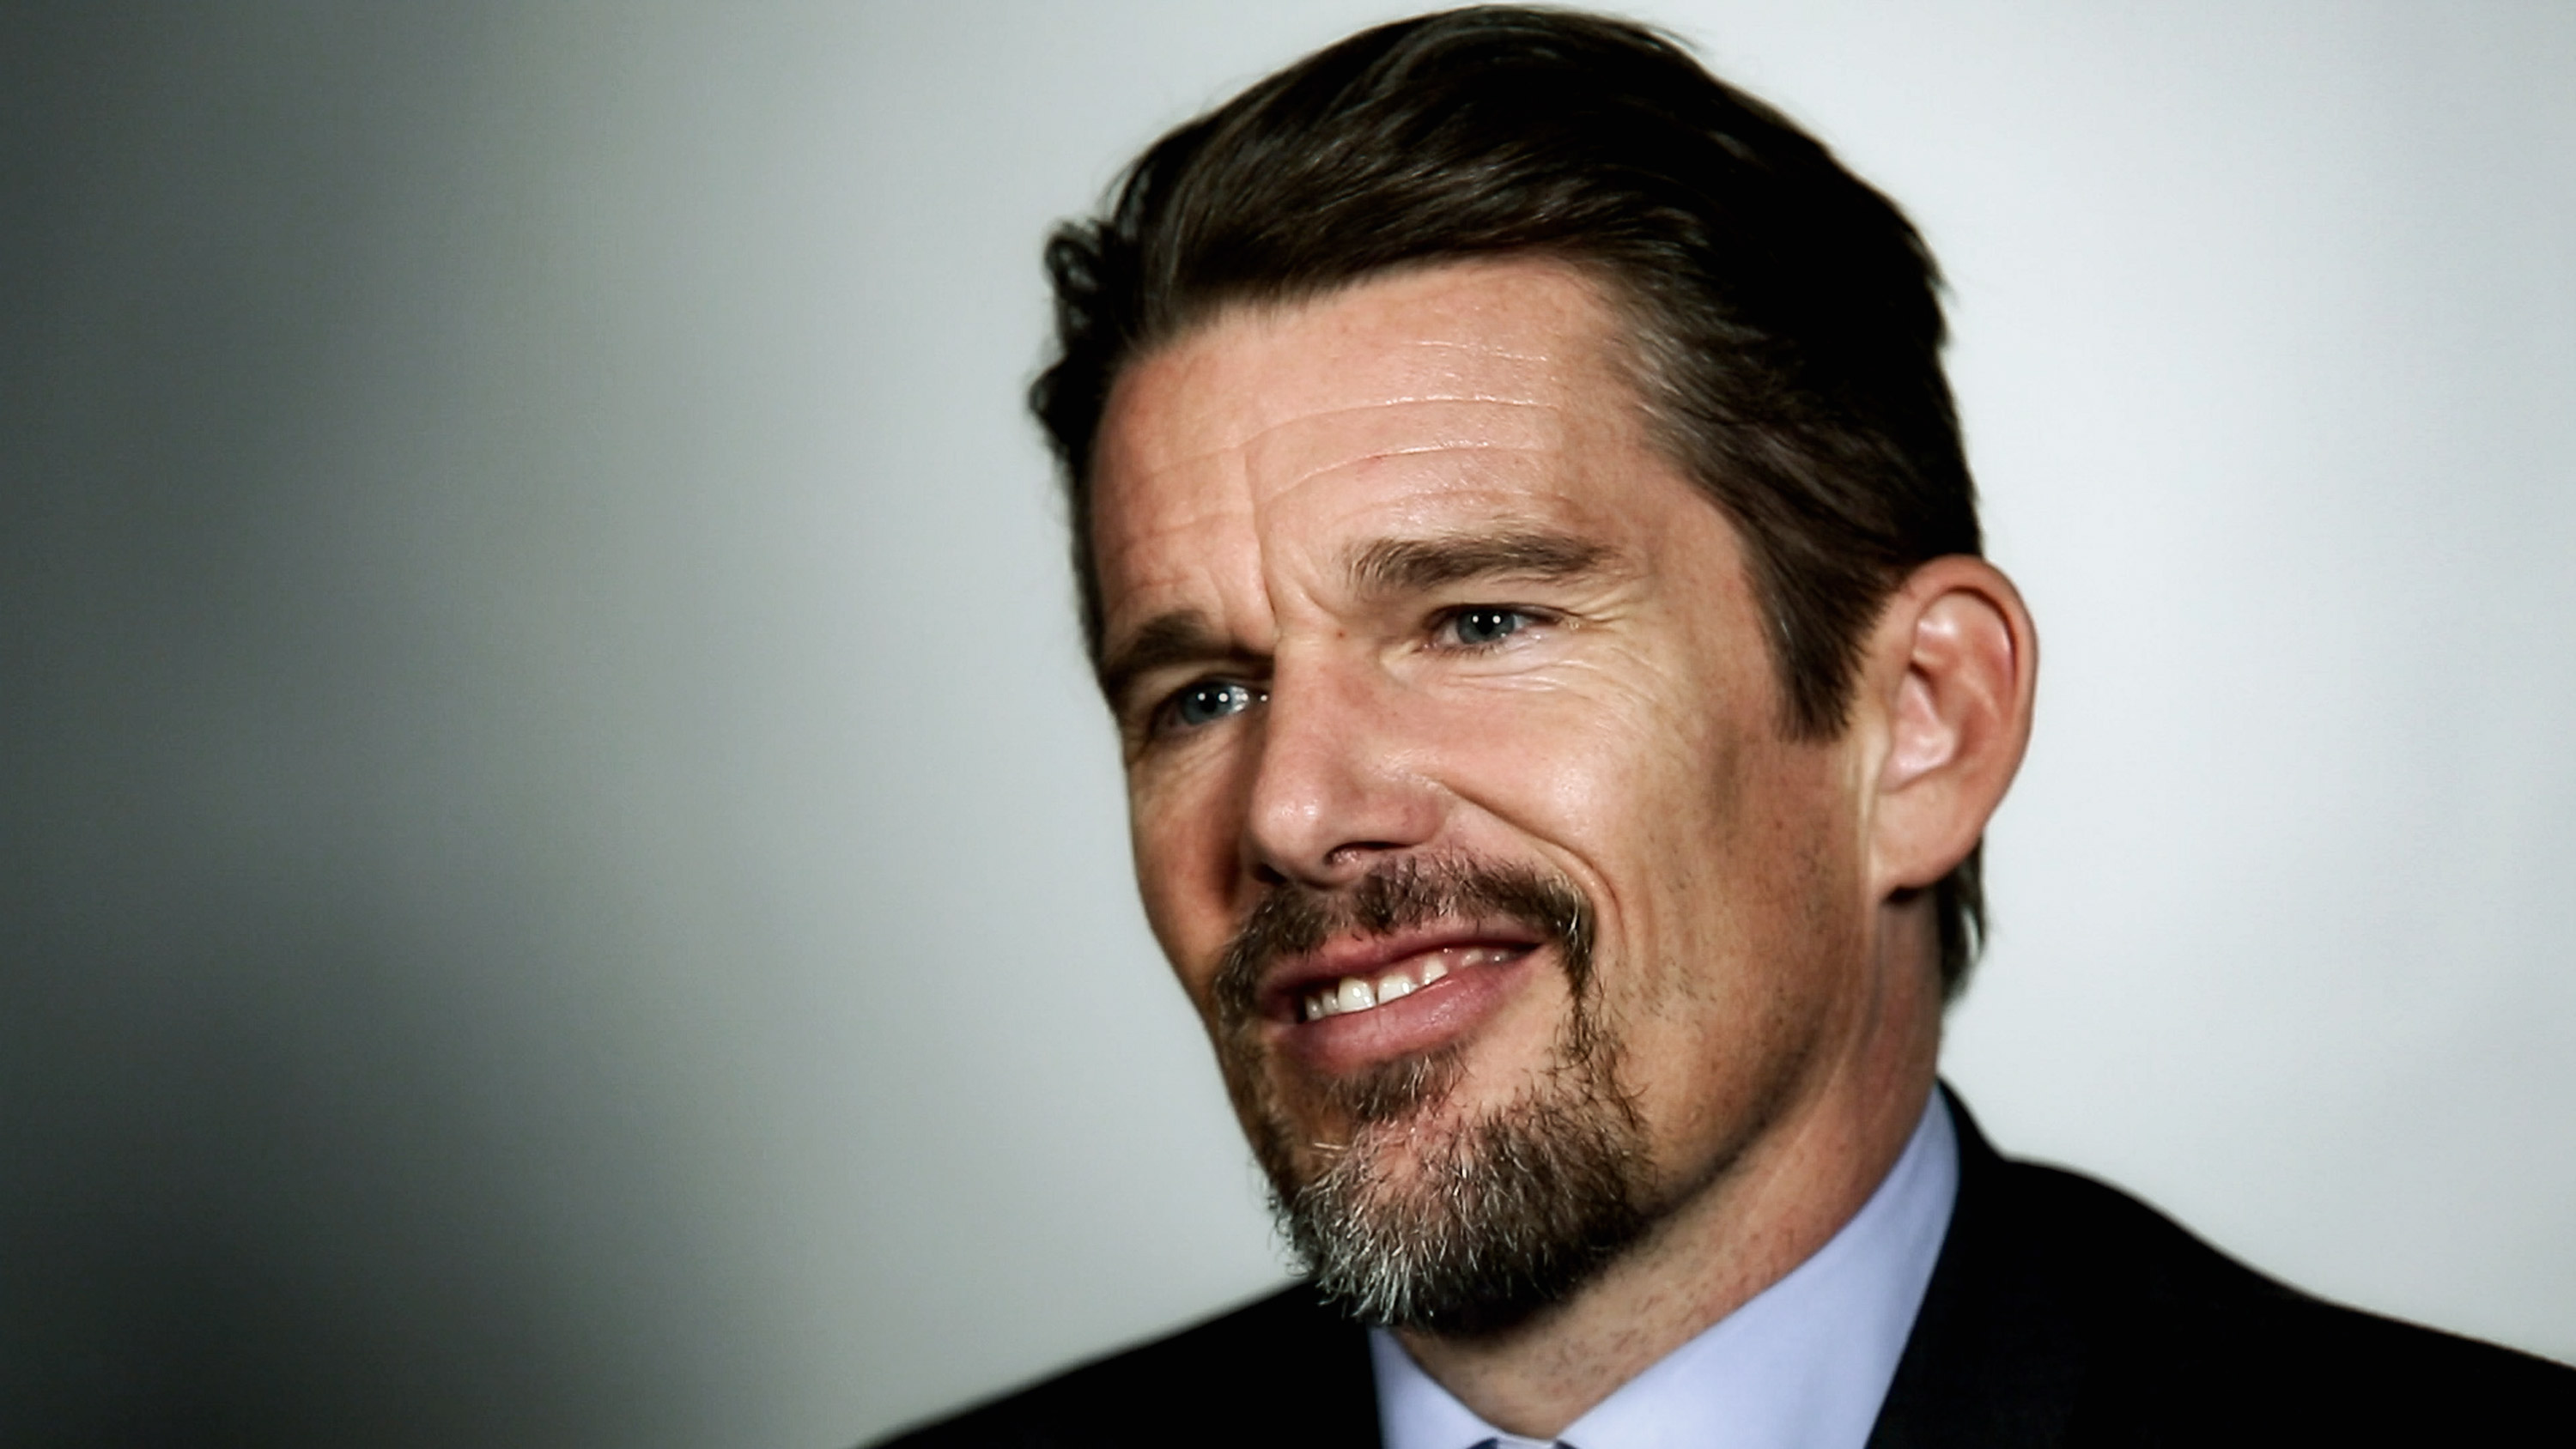 Ethan Hawke adapte "The Good Lord Bird" pour Blumhouse